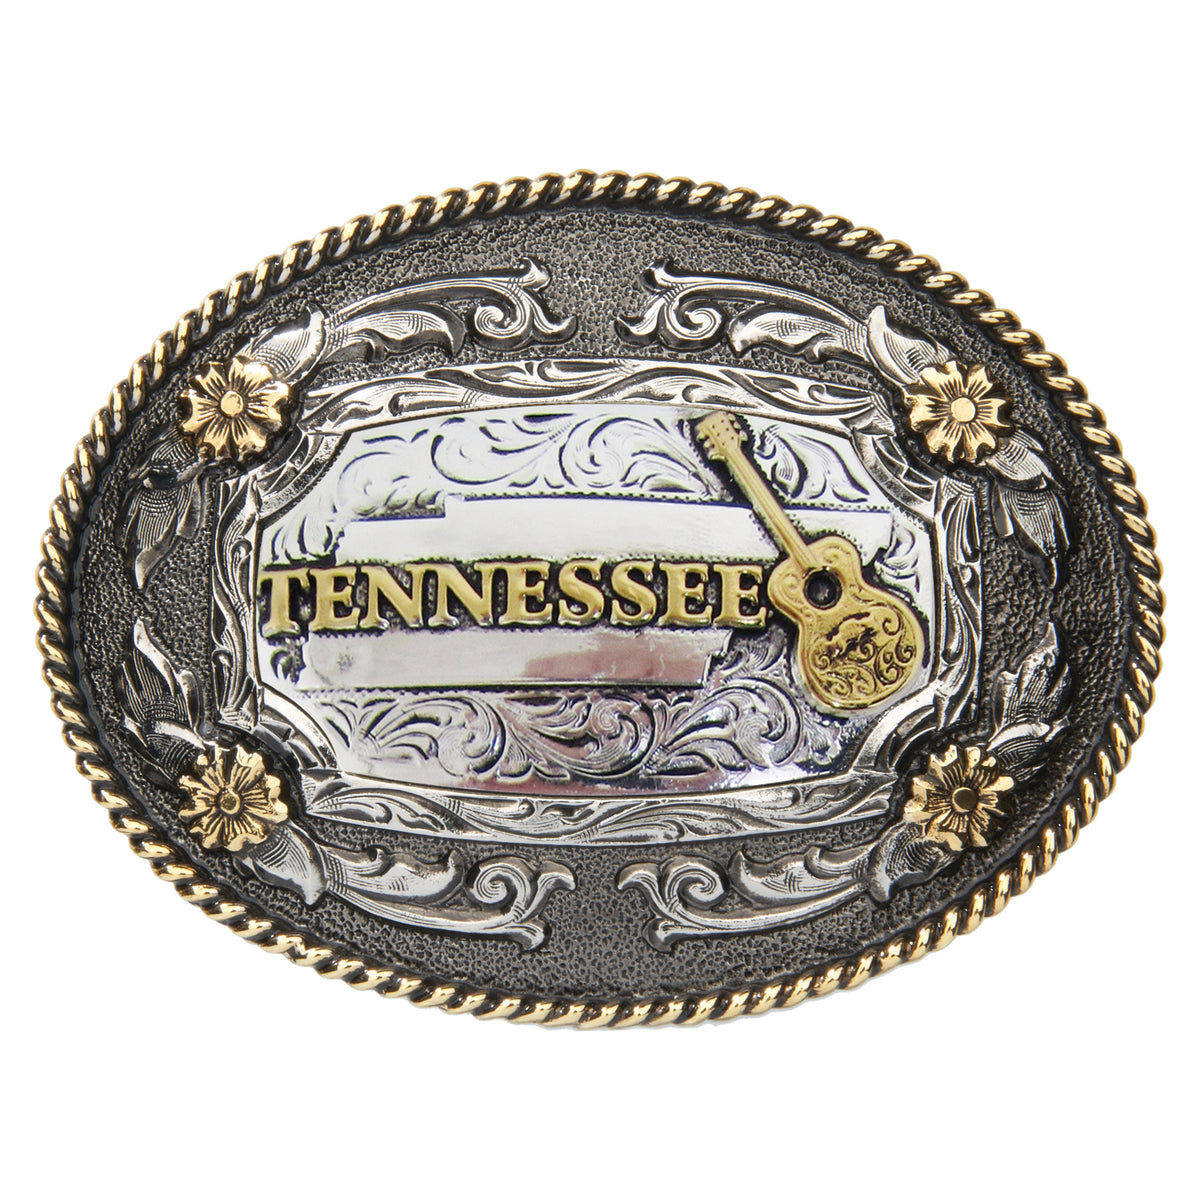 Tennessee — Oval Rope Edge Buckle